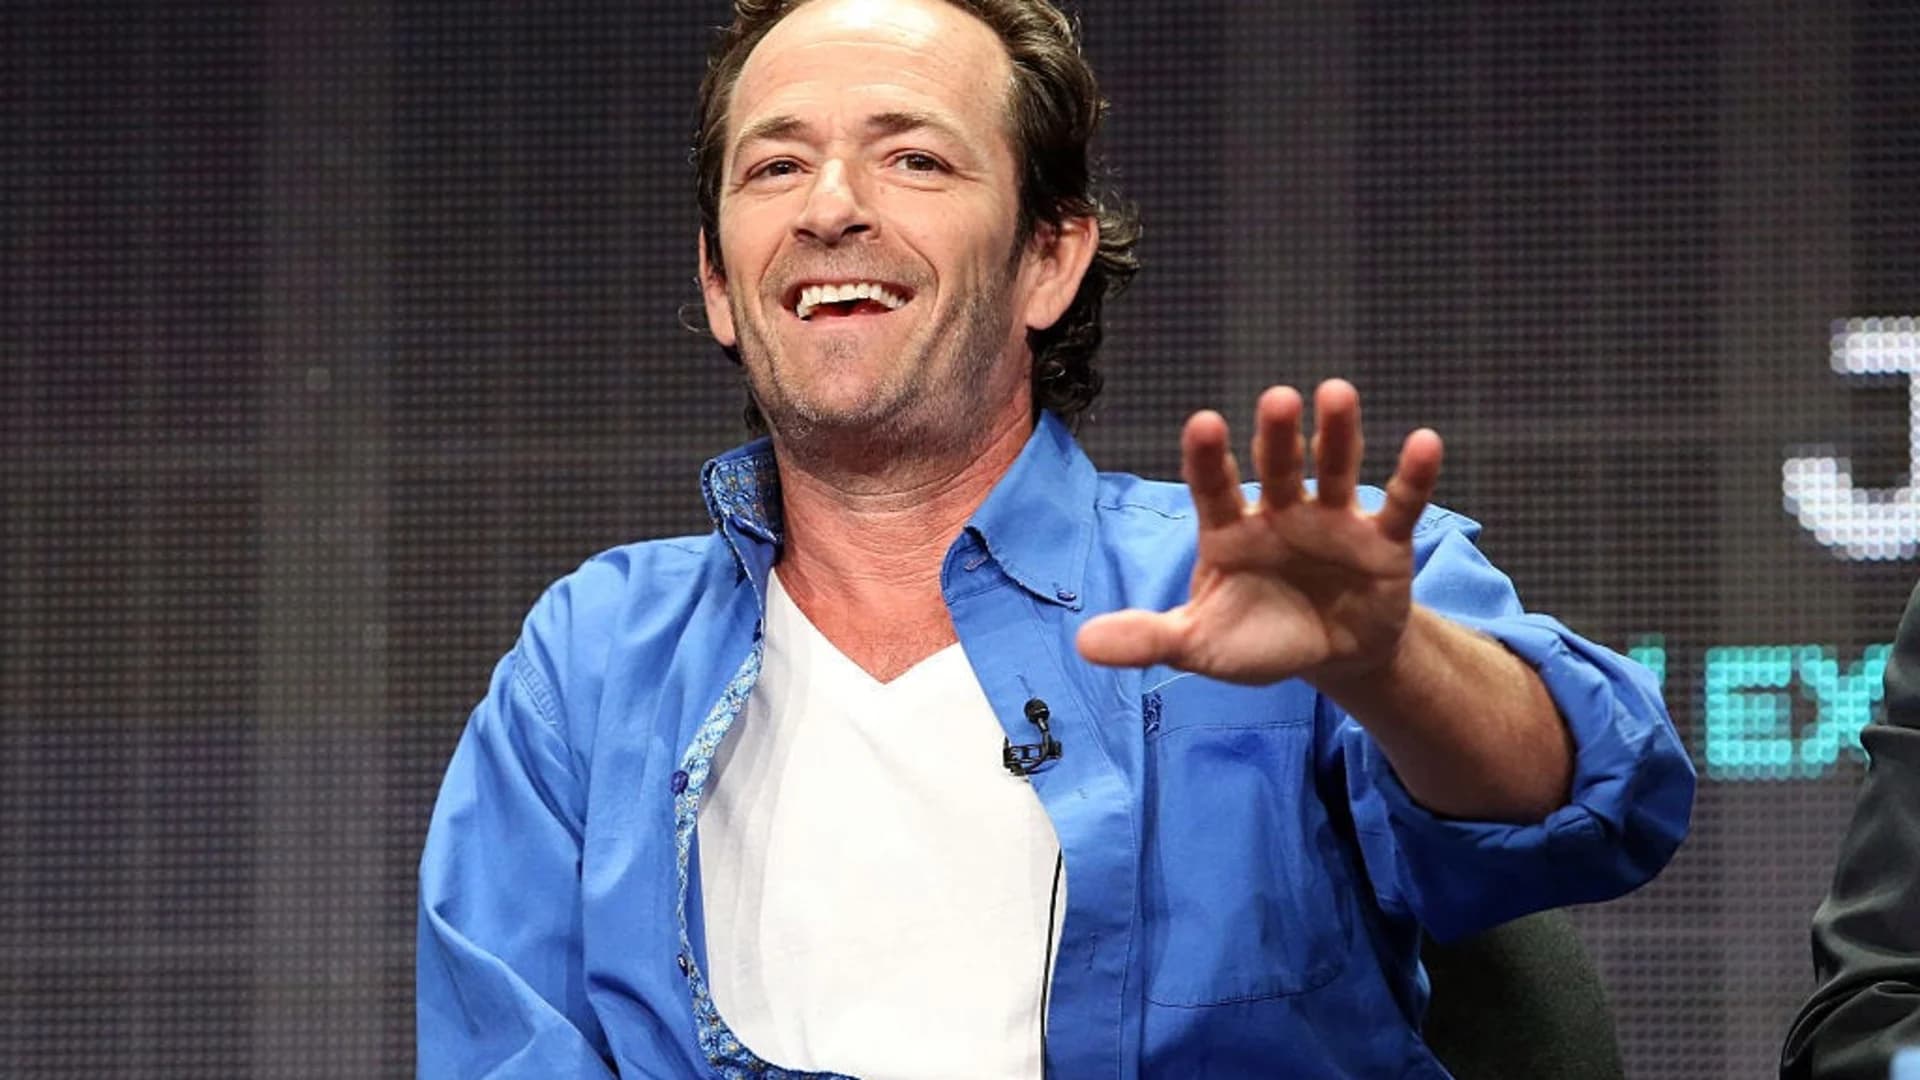 Publicist: Luke Perry dies at age 52 after suffering stroke